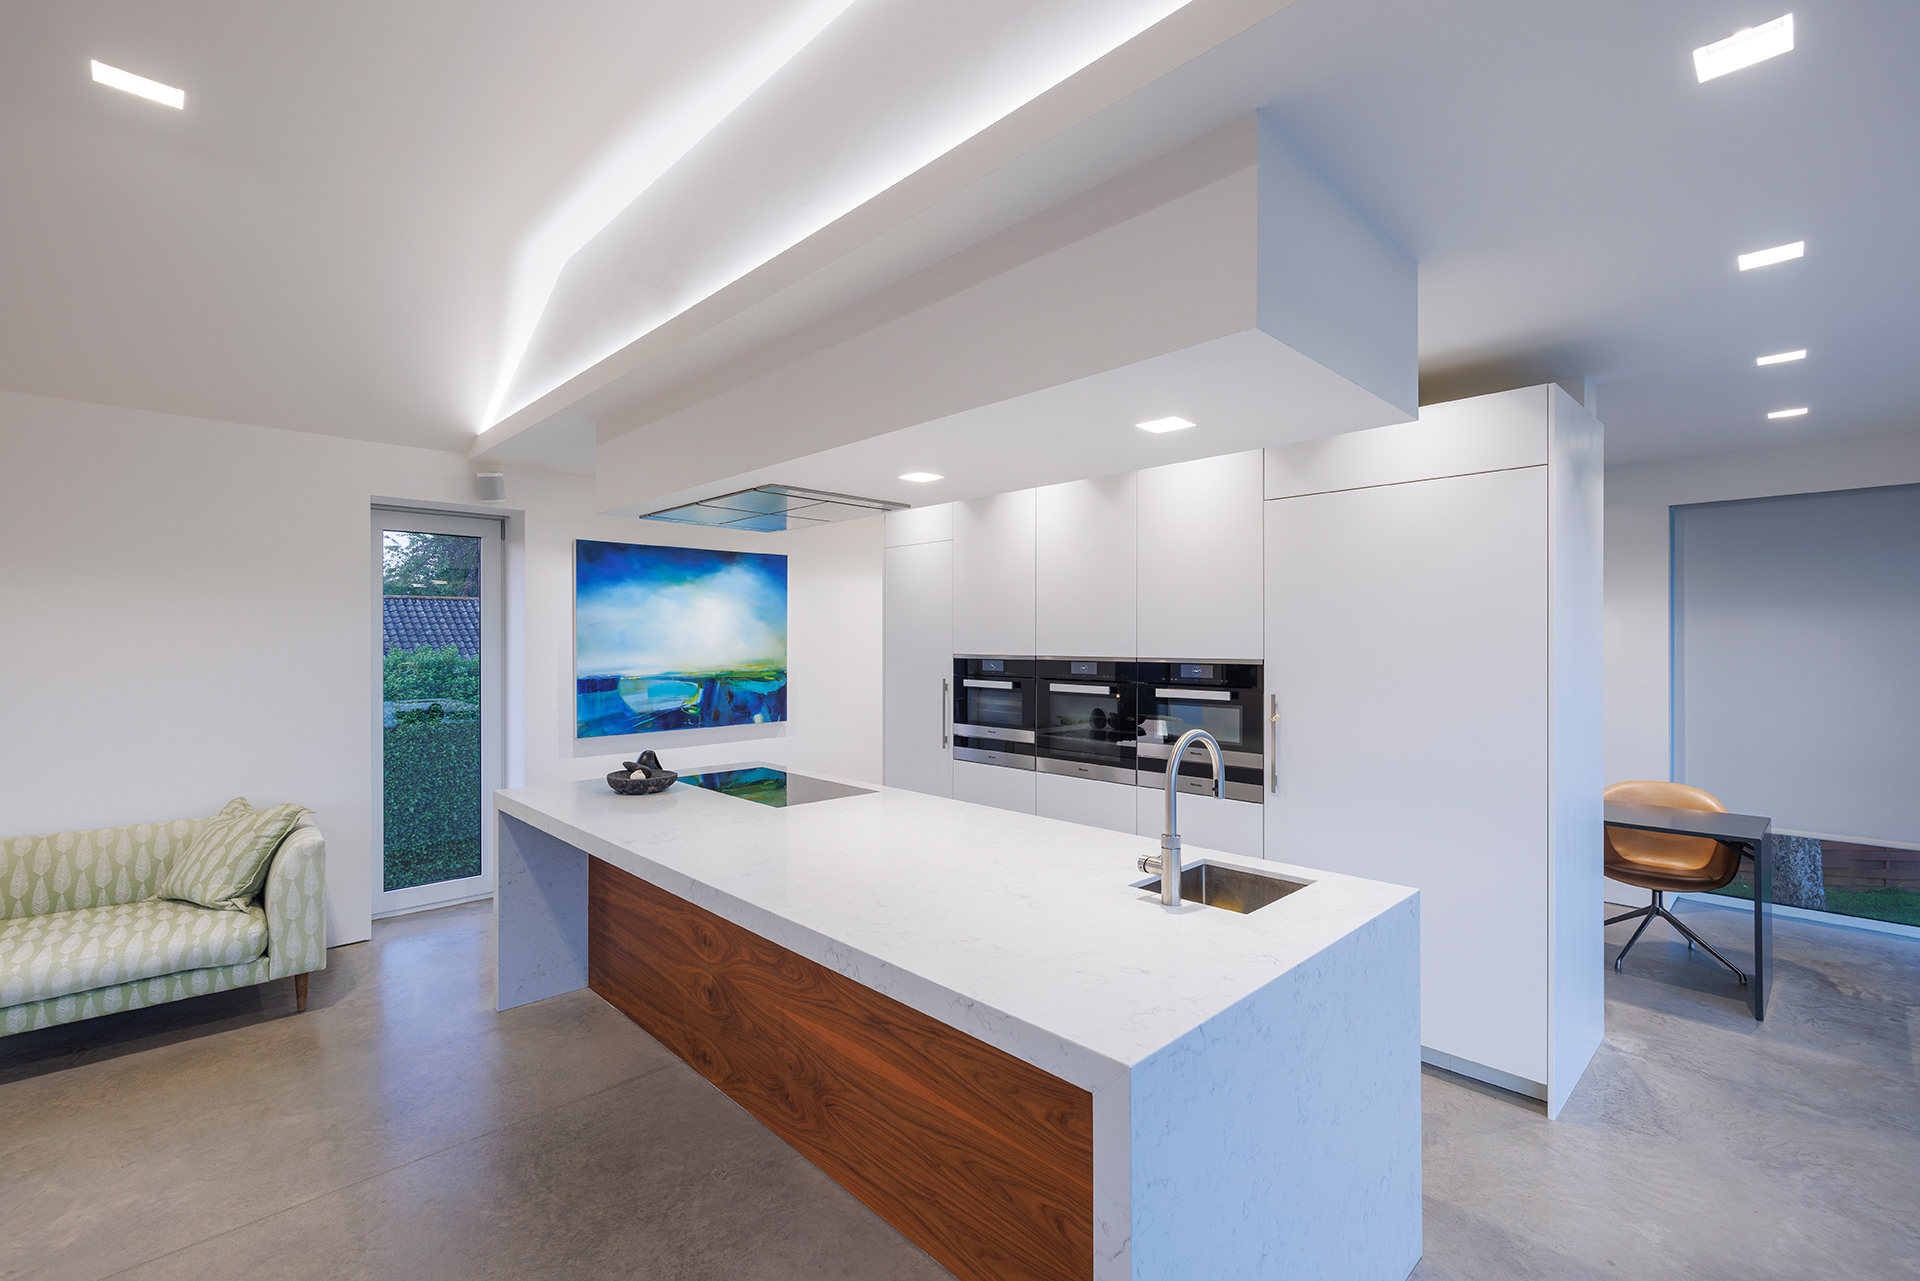 modern kitchen in white tones with cove lights in ceiling